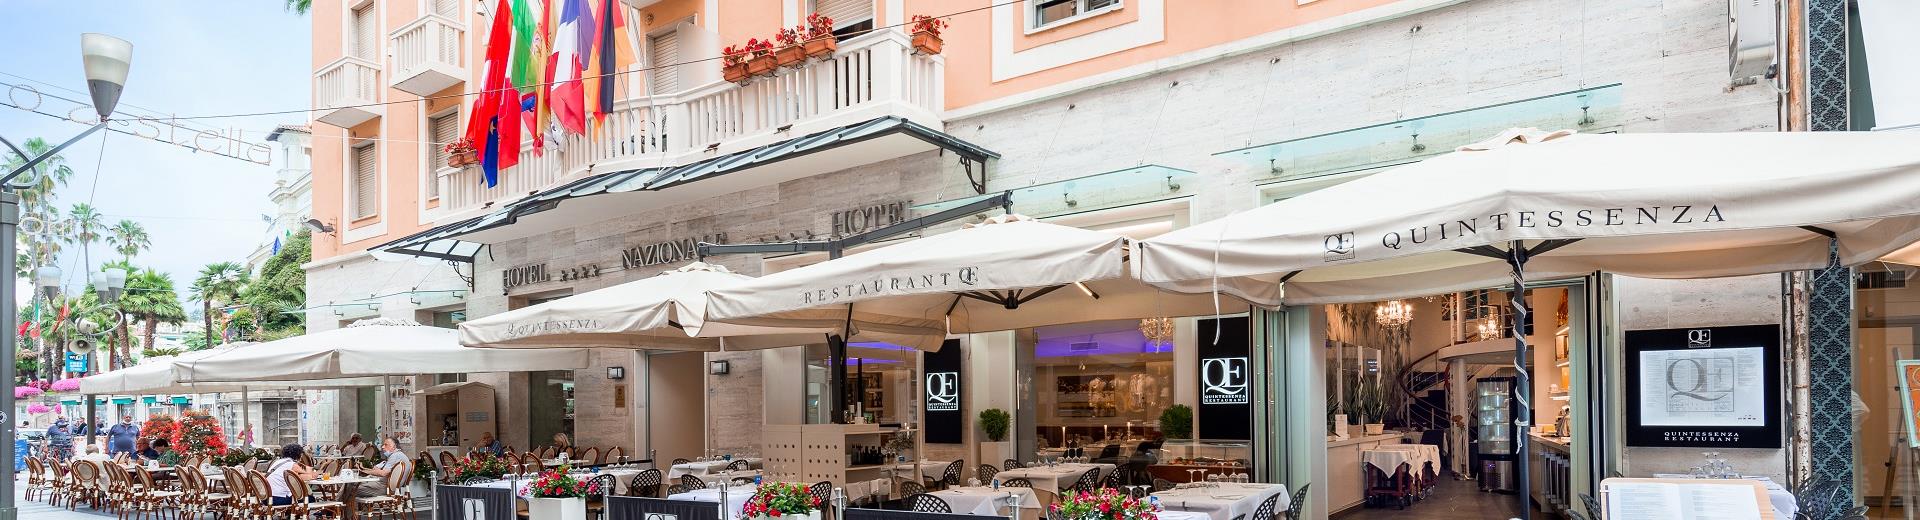 Try the specialties of our restaurant in Sanremo centro